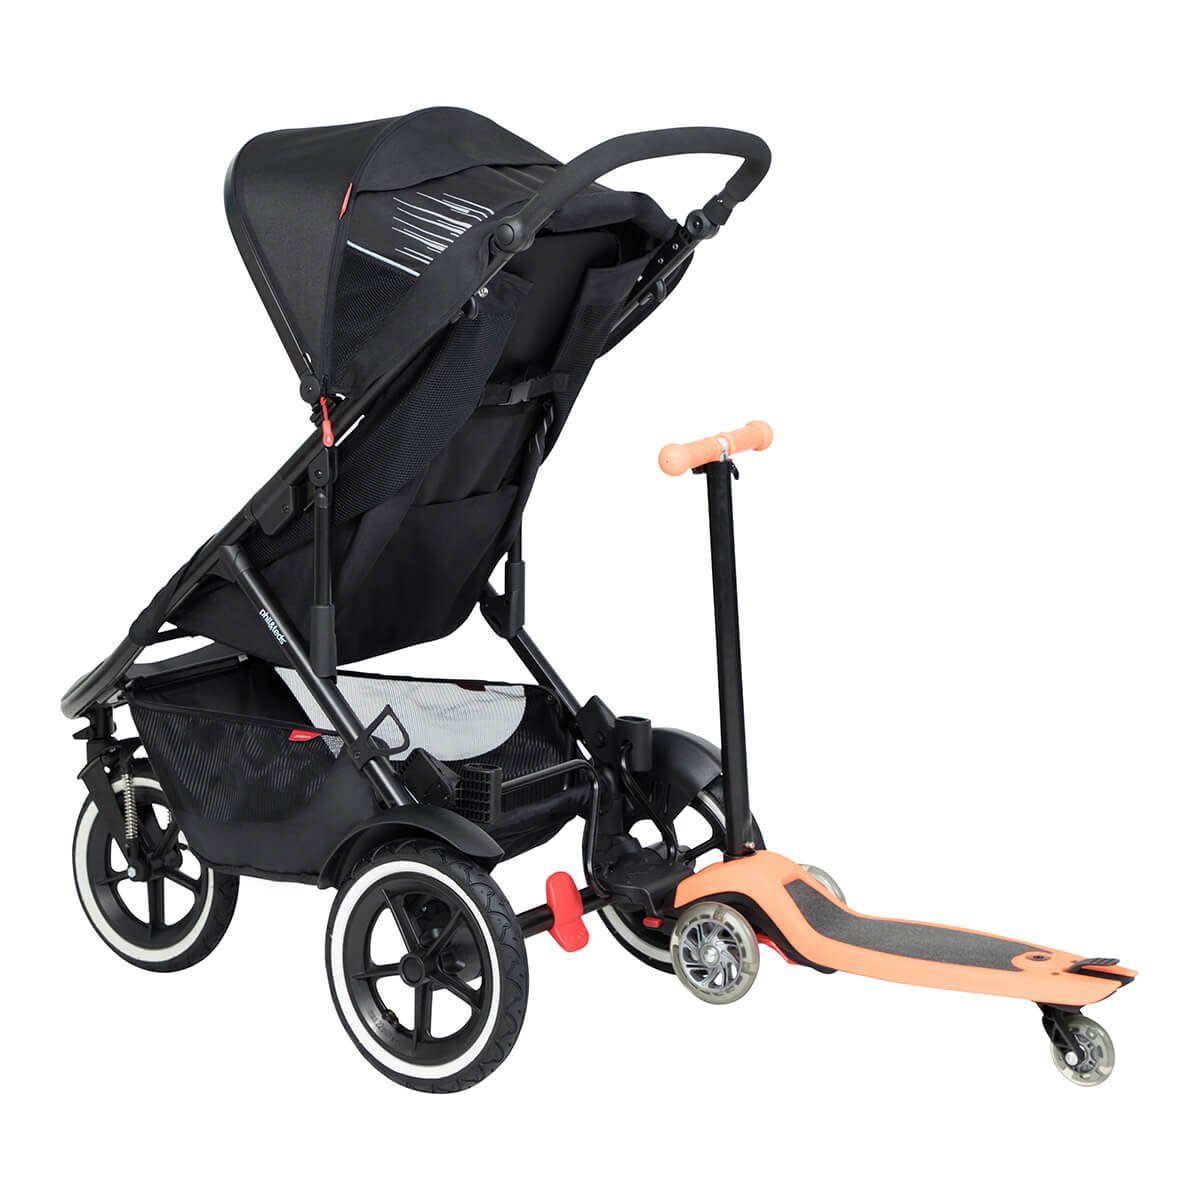 https://cdn.accentuate.io/4417294565410/19437753860274/philteds-sport-buggy-with-freerider-stroller-board-in-rear-v1626482898690.jpg?1200x1200